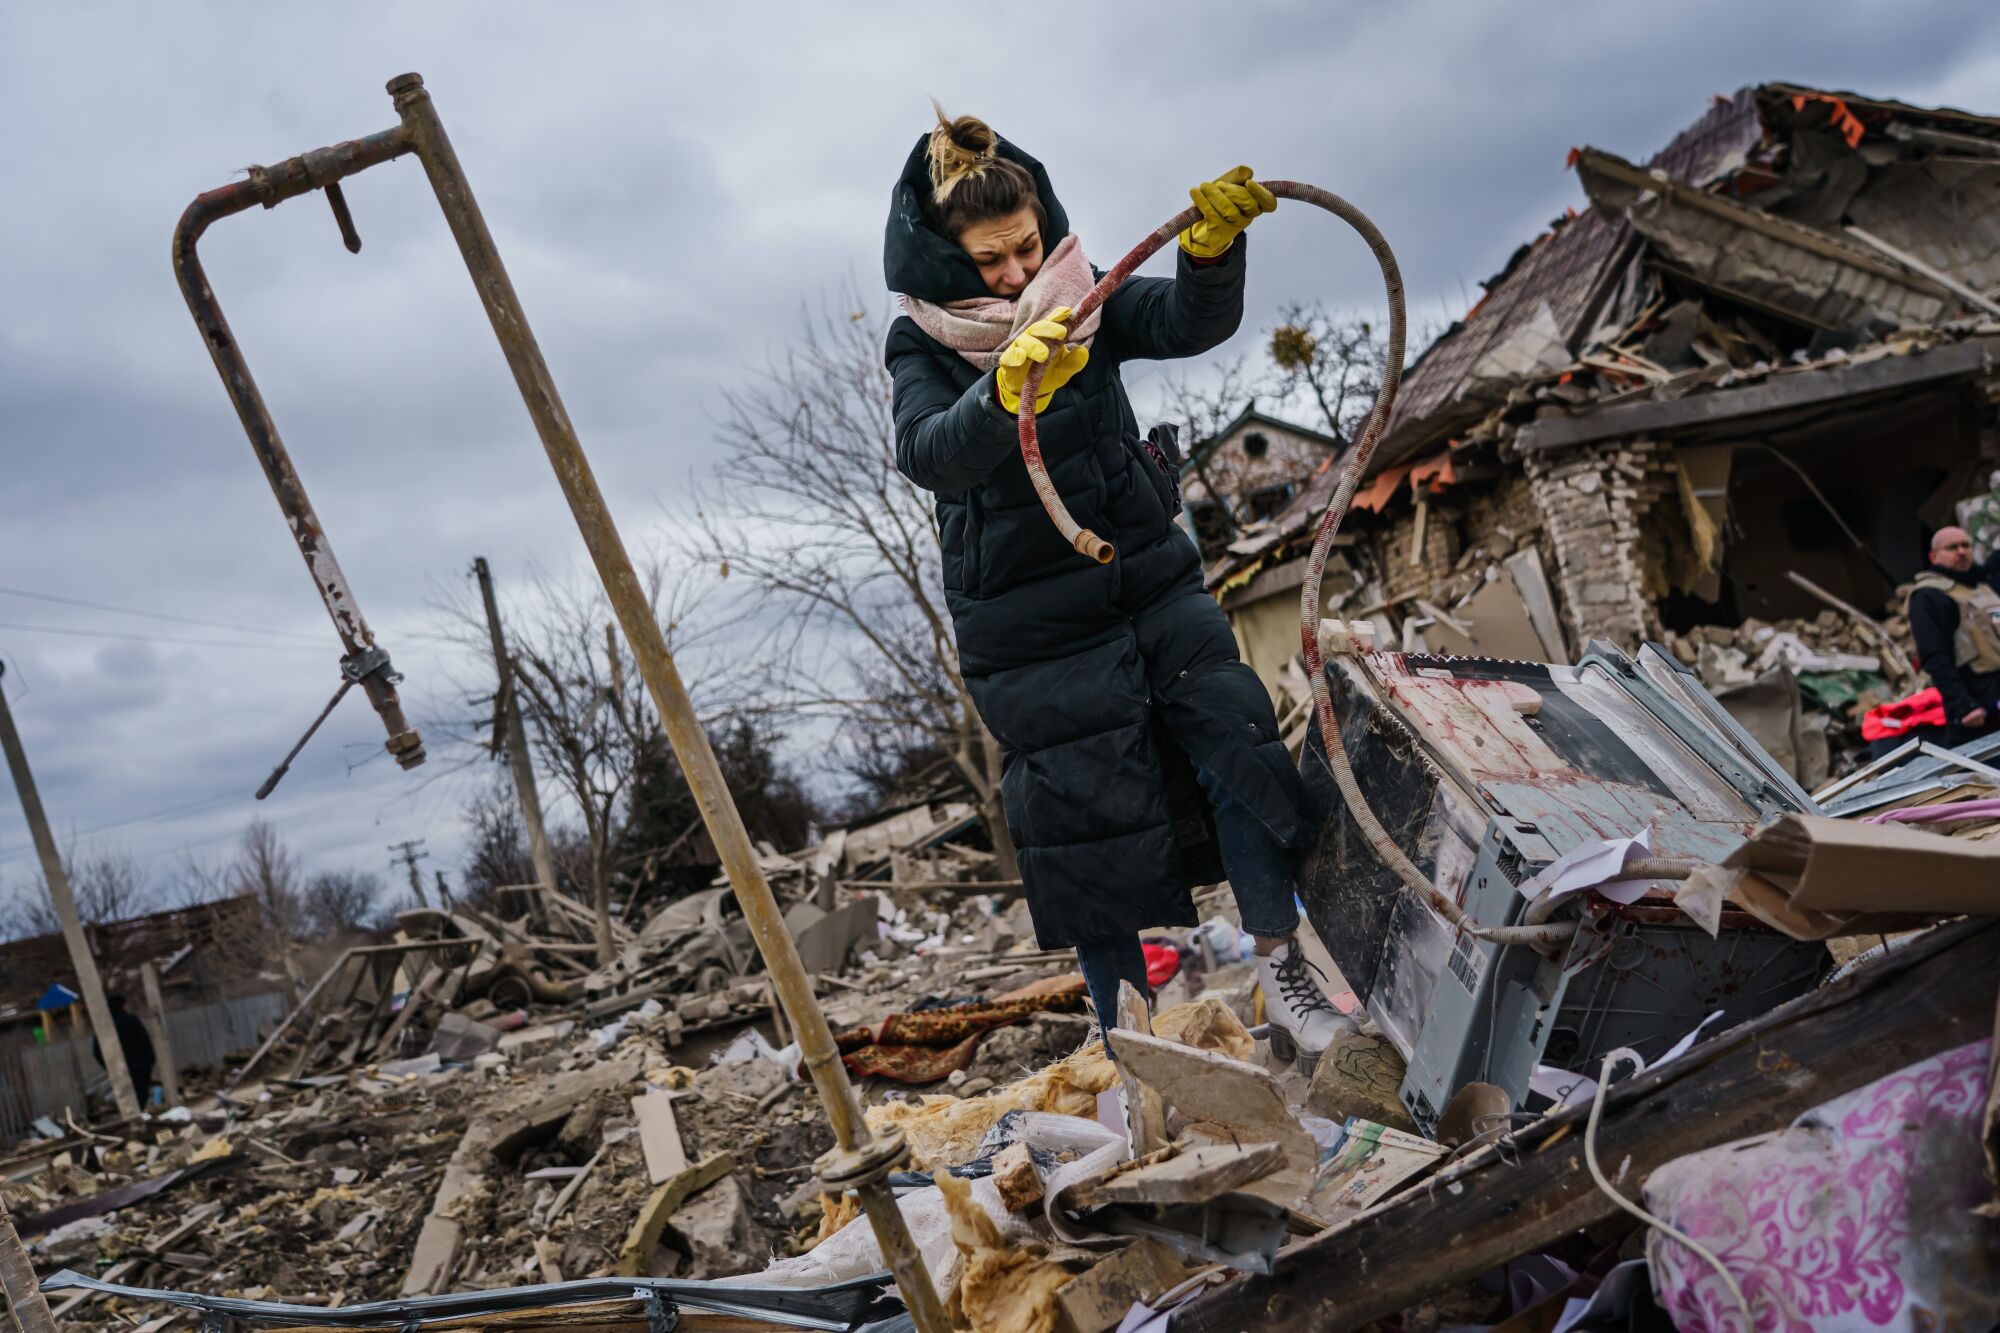 A woman holds up a hose that has red stains on it amid rubble.